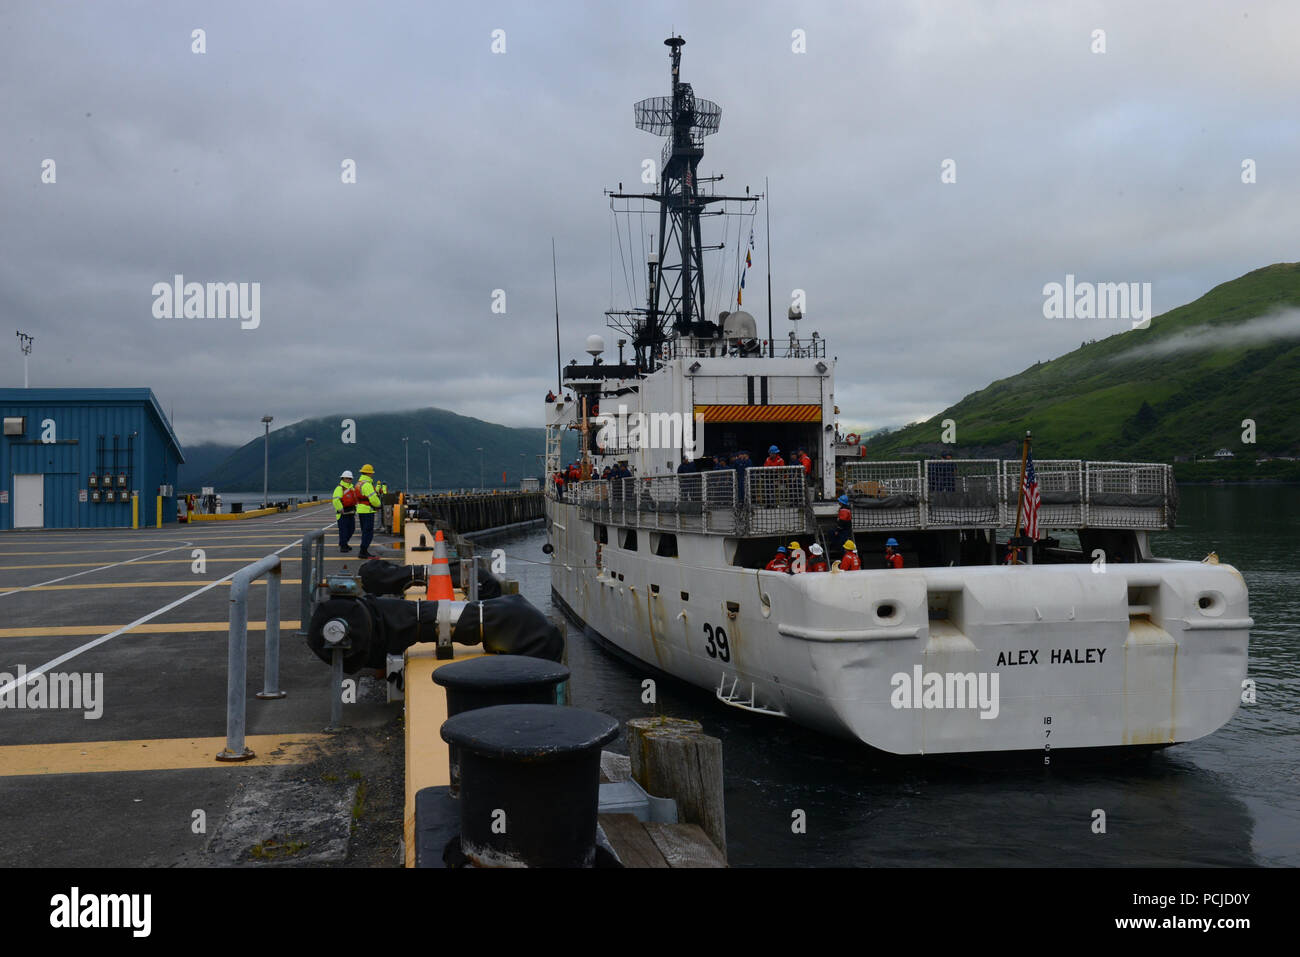 The Coast Guard Cutter Alex Haley (WMEC 39) returns to its homeport in Kodiak, Alaska, August 1, 2018. The crew members completed a 90-day deployment, patrolling more than 16,000 miles throughout the Pacific Ocean. U.S. Coast Guard photo by Petty Officer 3rd Class Lauren Dean. Stock Photo